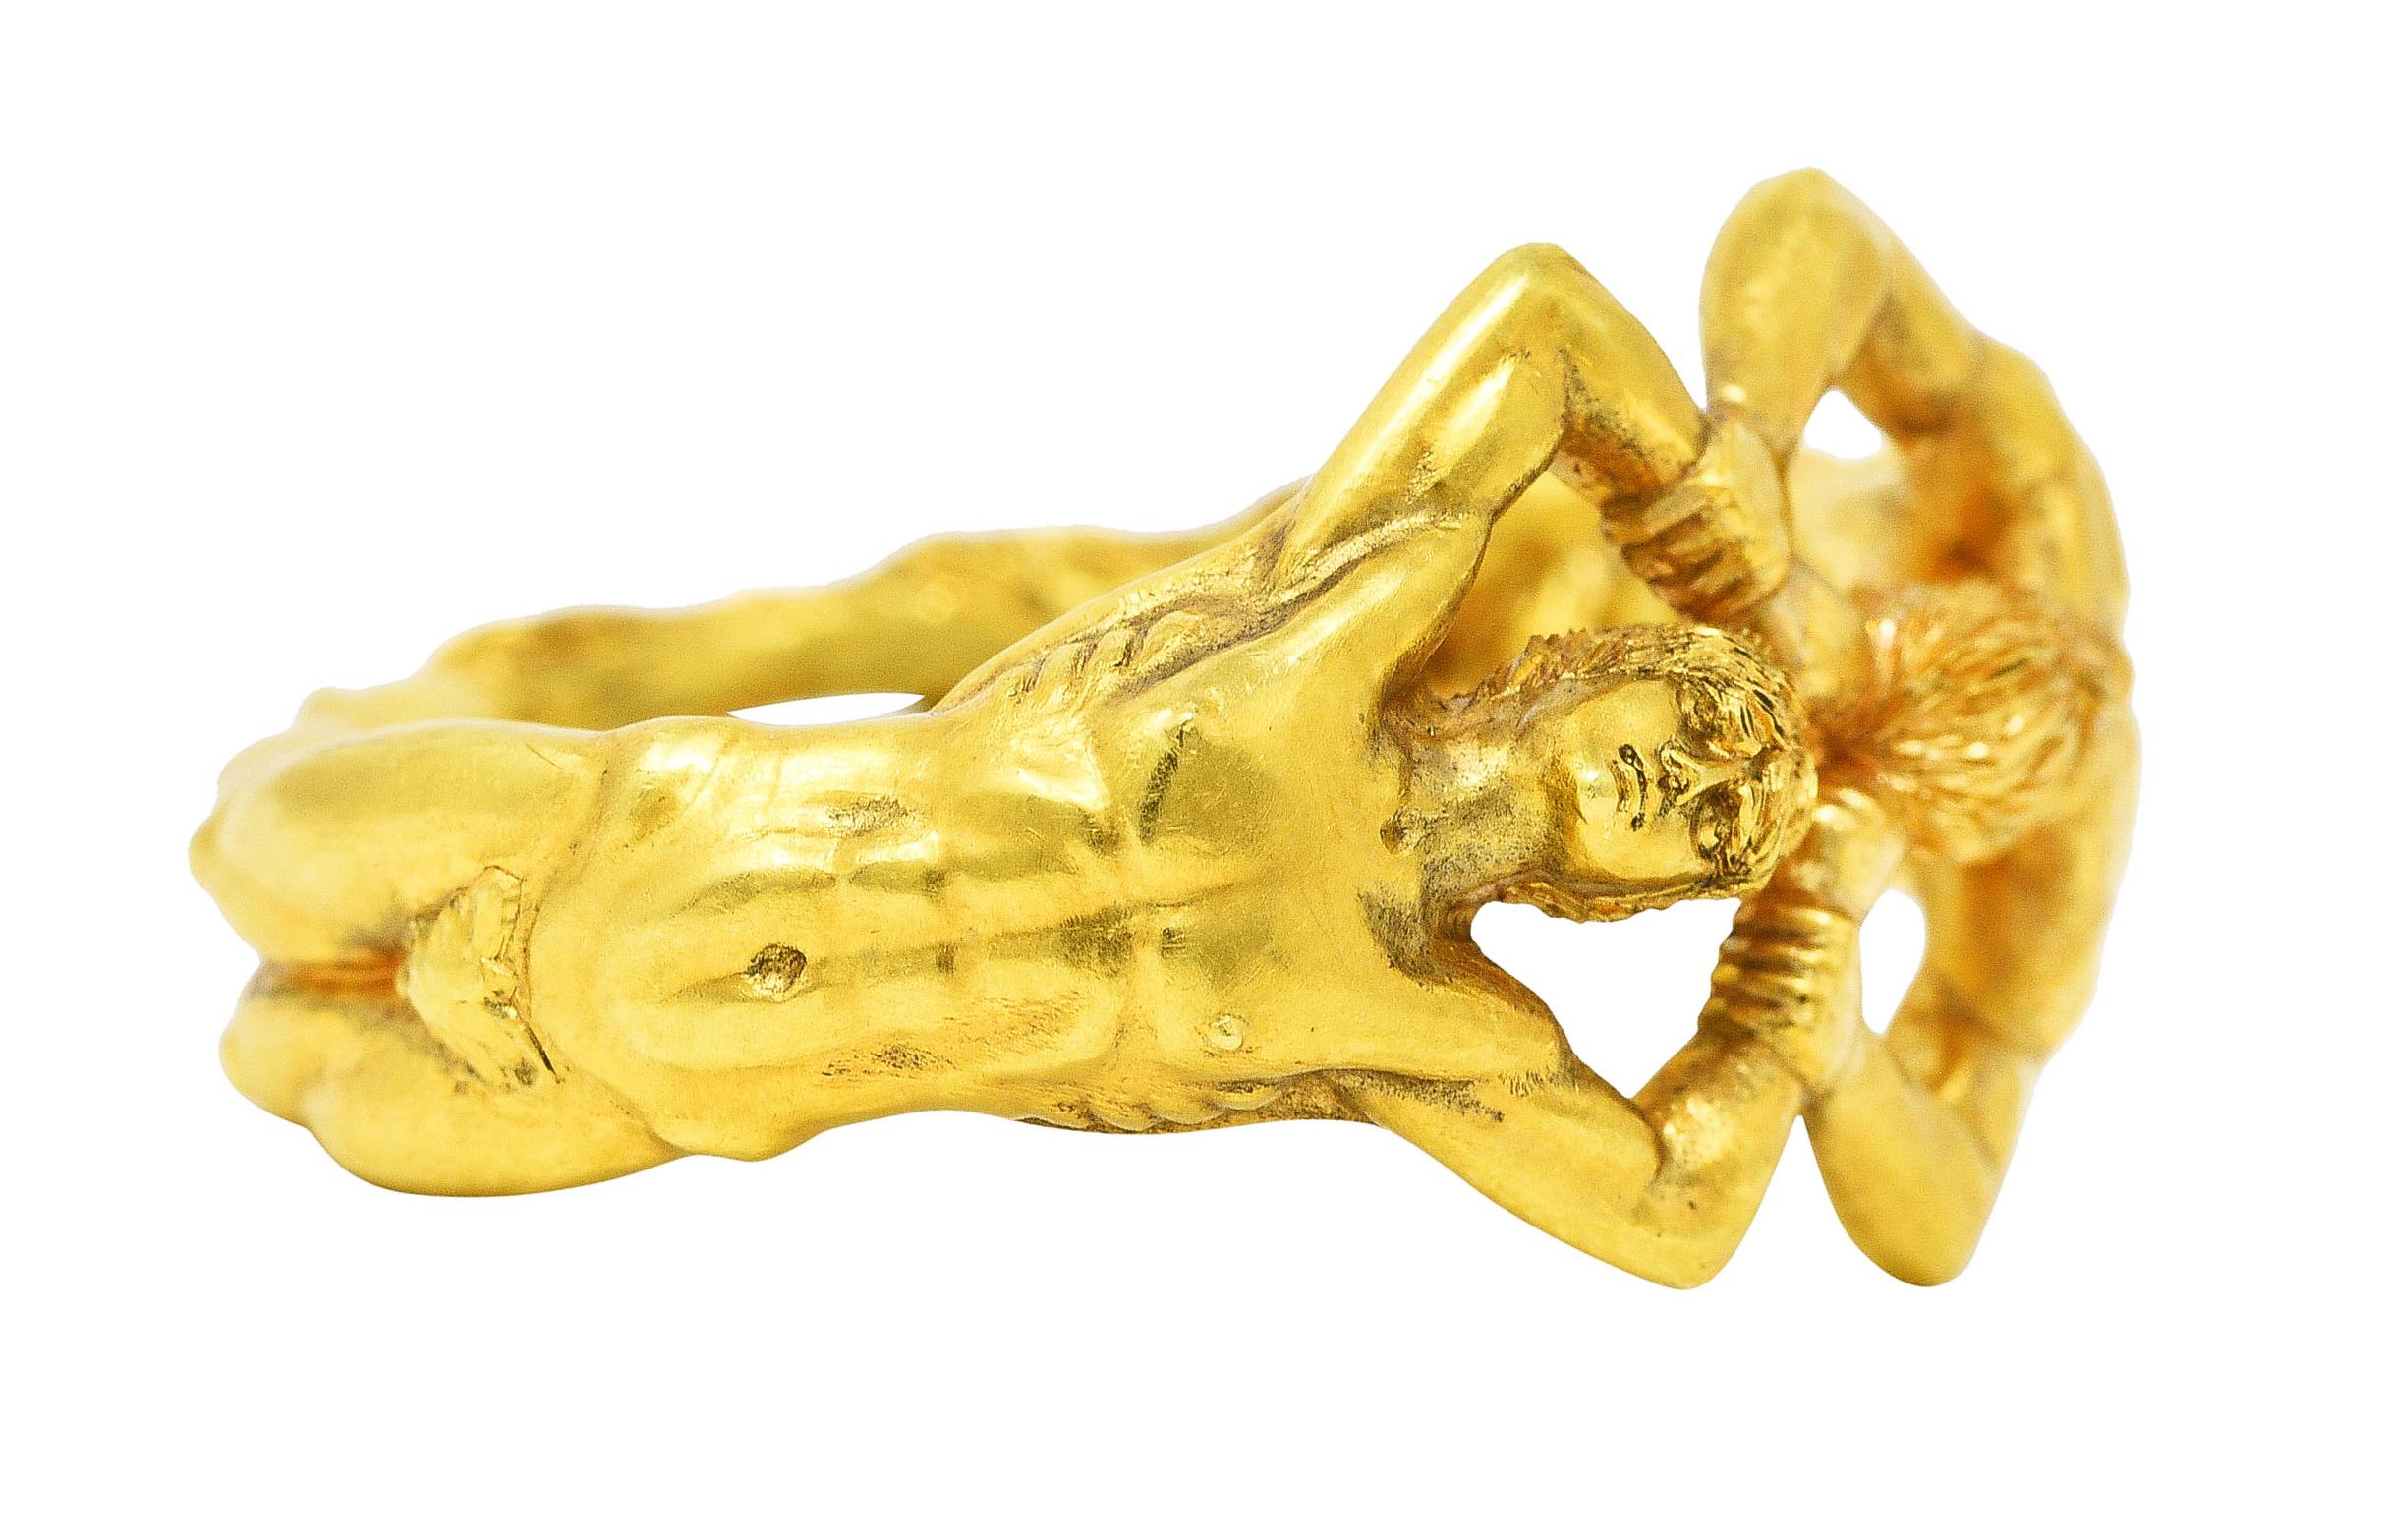 Ring is designed as two highly rendered figures - one human and one a hirsute satyr. With dramatically arched backs - figures meet hand to hand and foot to foot. Arms form a grappled buckle motif. Completed by a matte gold finish with intricate